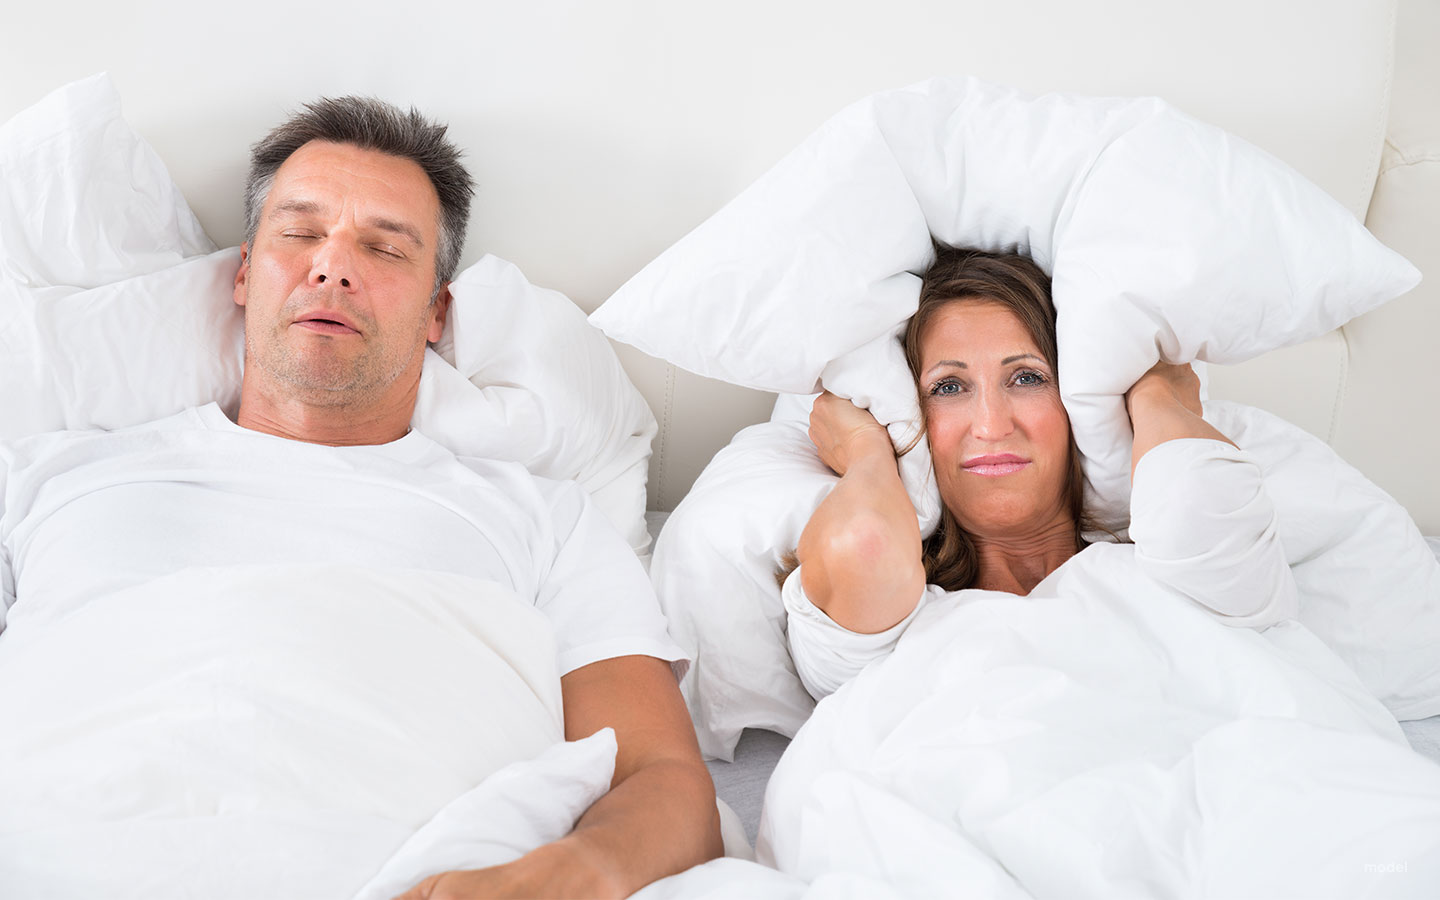 Sleep apnea - what is it? How to recognize and treat it?